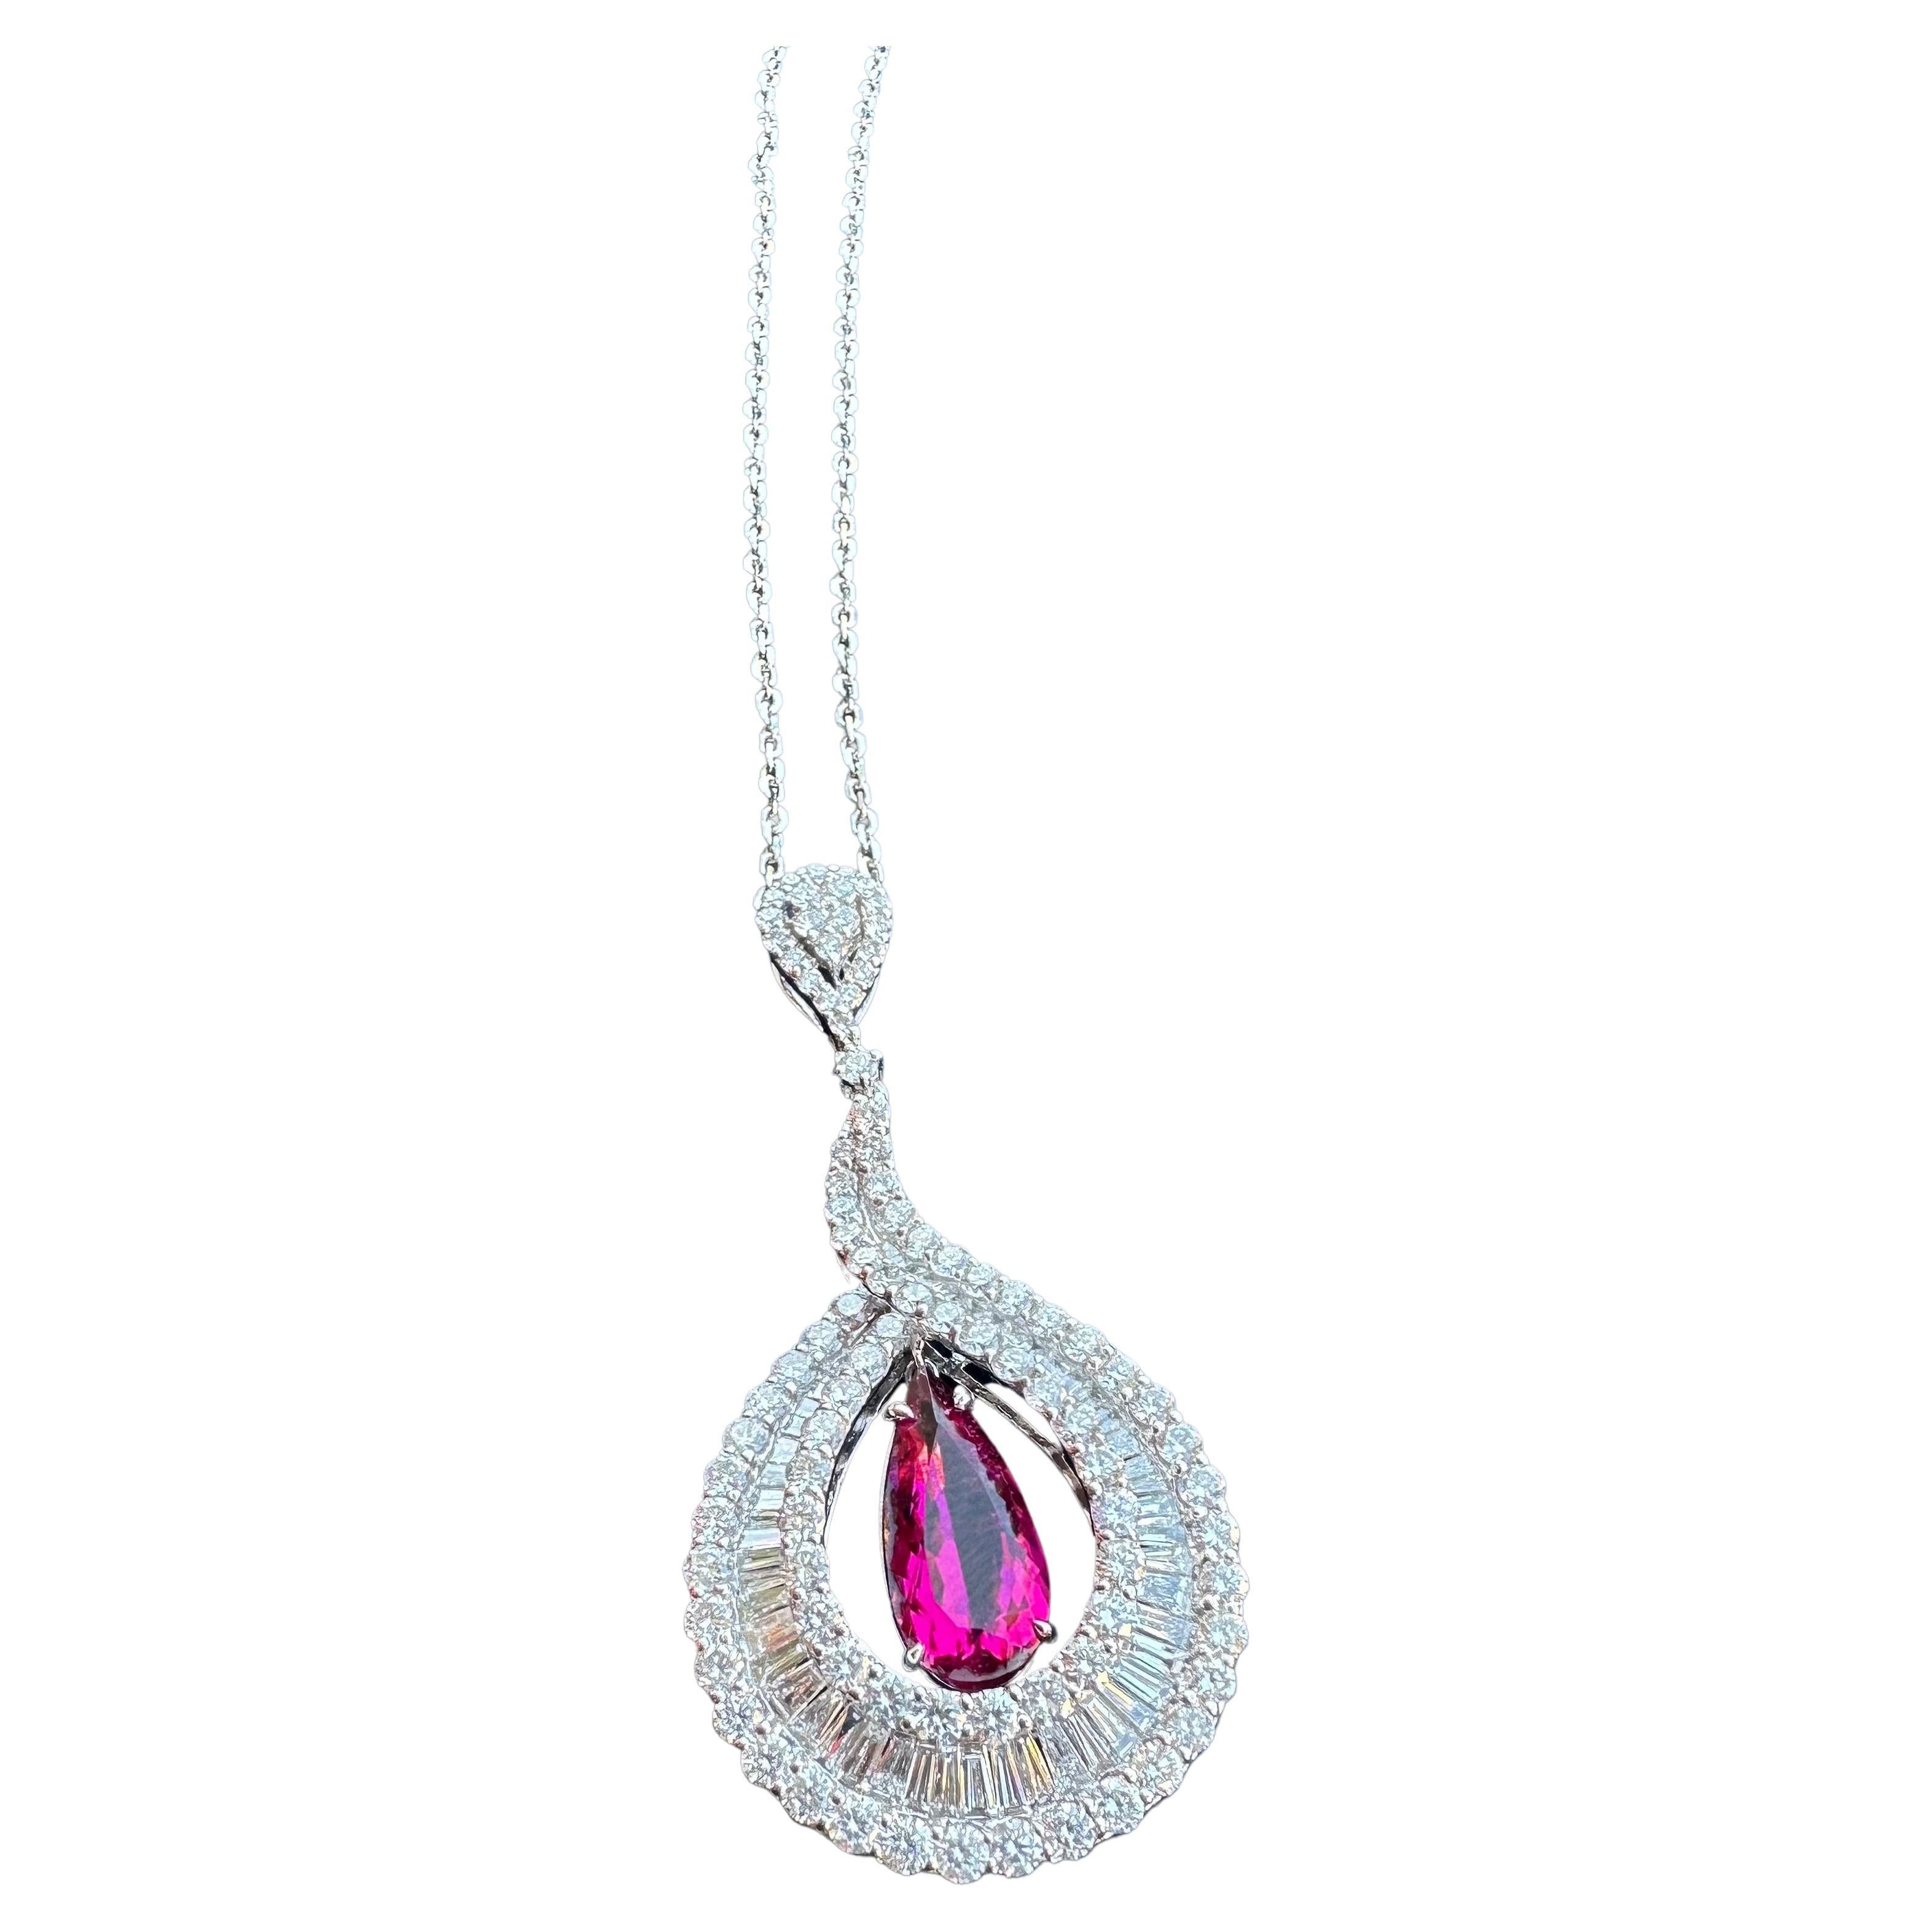 Ravishing, very dazzling in real life, 18 karat white gold vivid pinkish red natural no heat Brazilian rubellite and diamond tear drop or pear shaped pendant on chain has a combined total carat weight of approximately 10.20 carats. 

The pendant